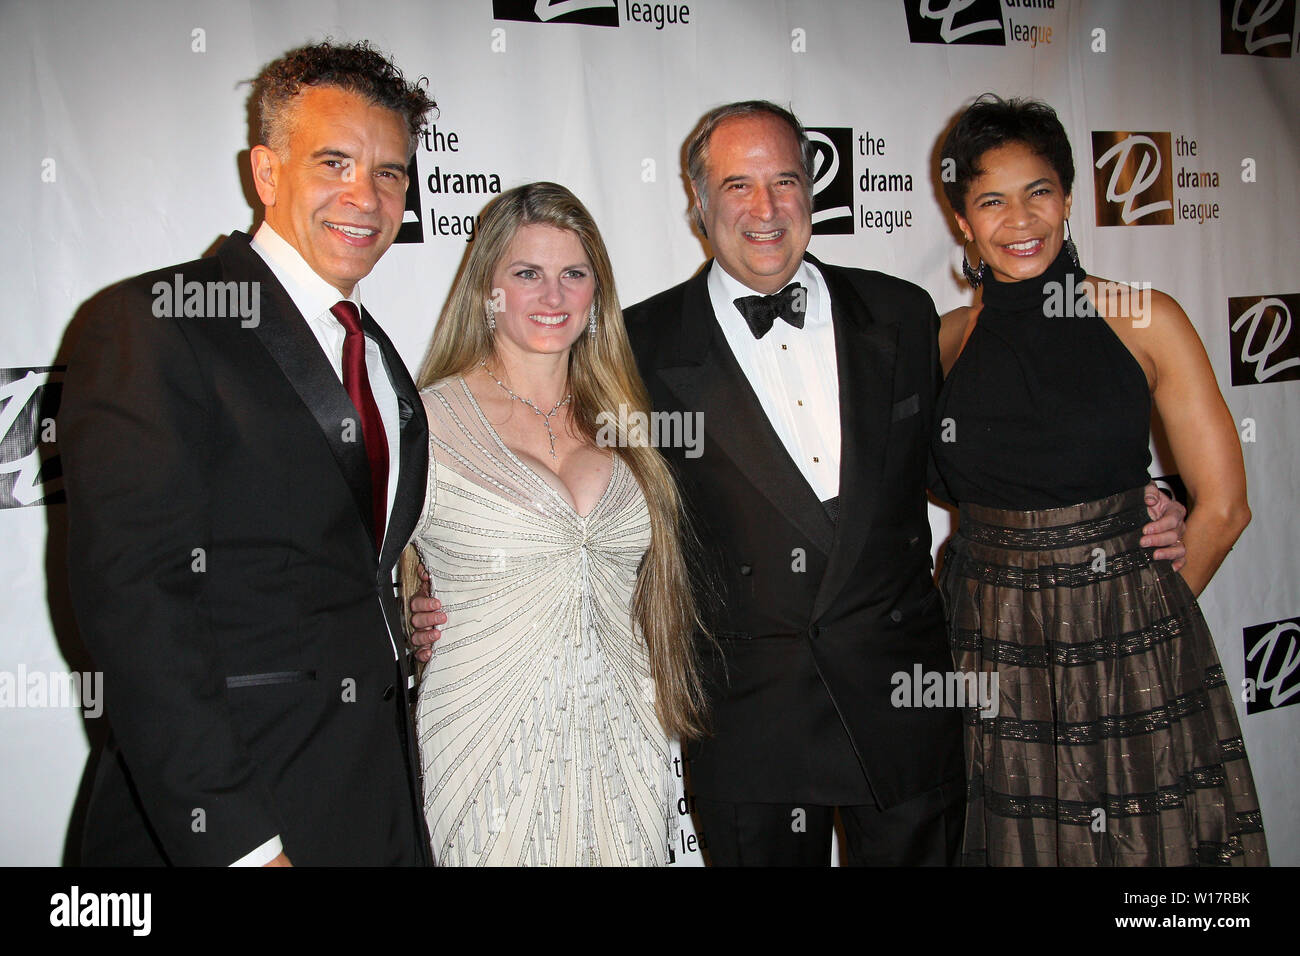 New York, USA. 11 February, 2009. Brian Stokes Mitchell, Bonnie Comley, Stewart F. Lane, Allyson Tucker at the Drama League's 25th annual All Star benefit gala at The Rainbow Room. Credit: Steve Mack/Alamy Stock Photo